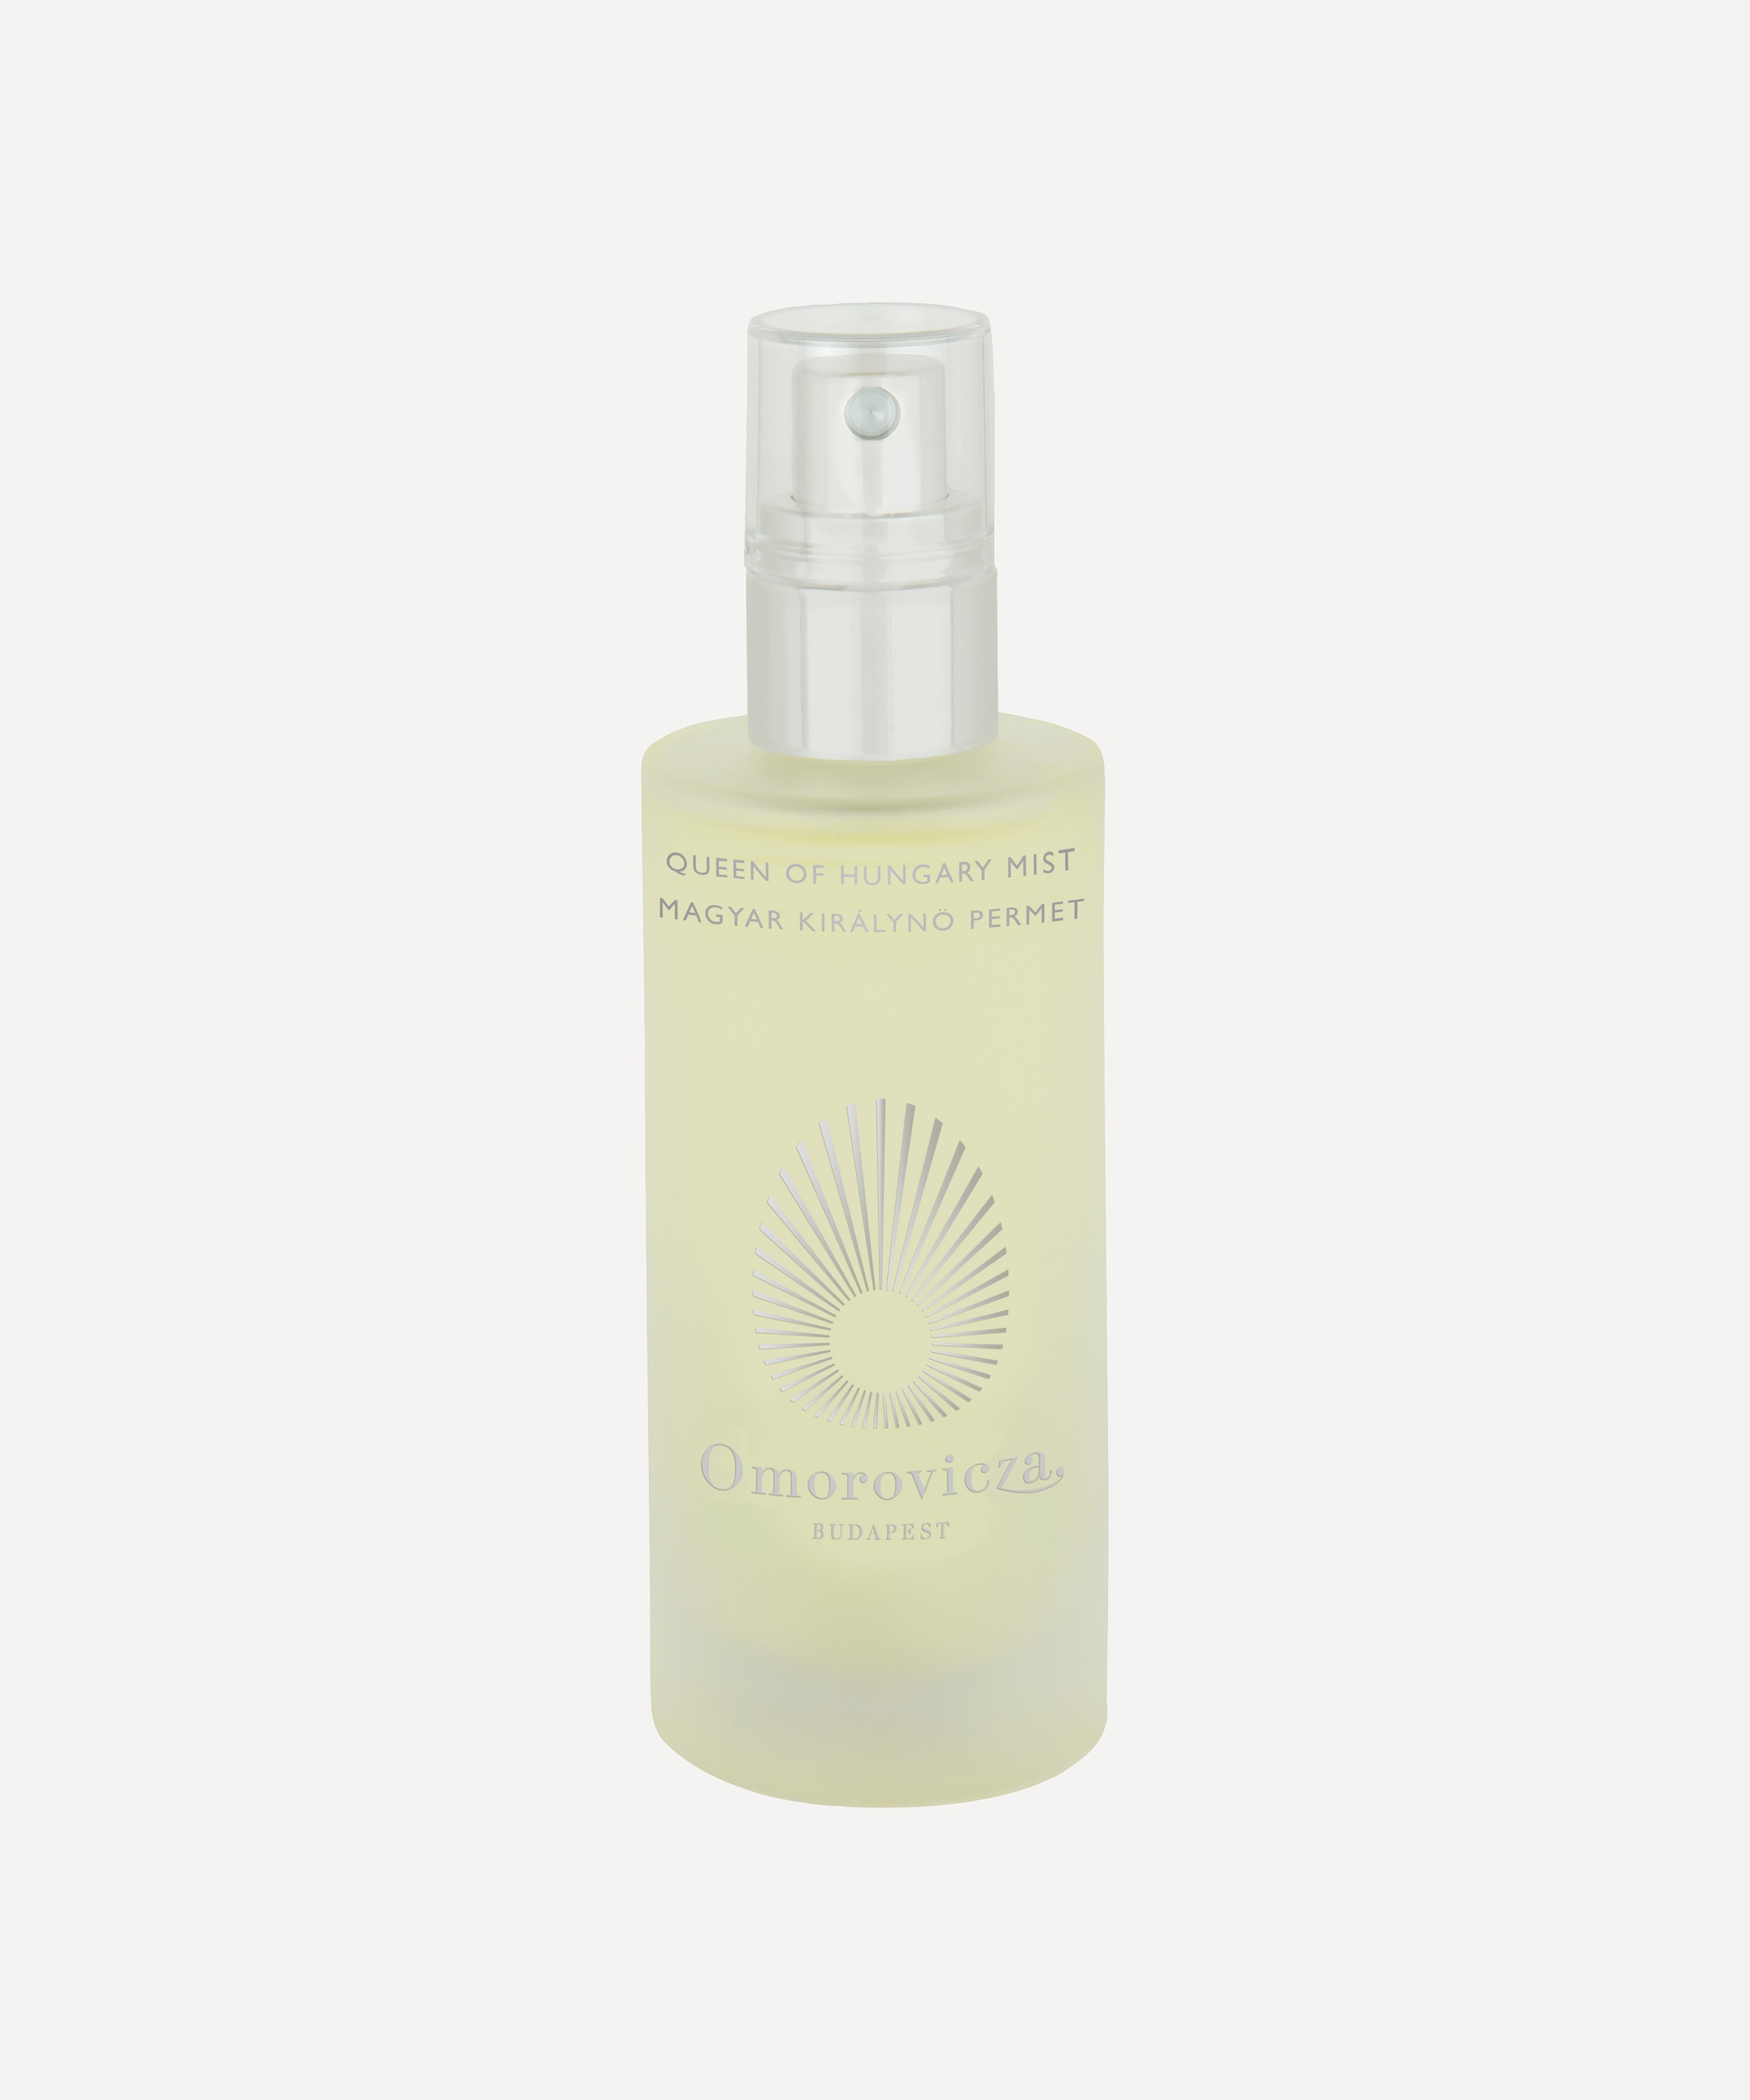 Omorovicza - Queen Of Hungary Mist 100ml